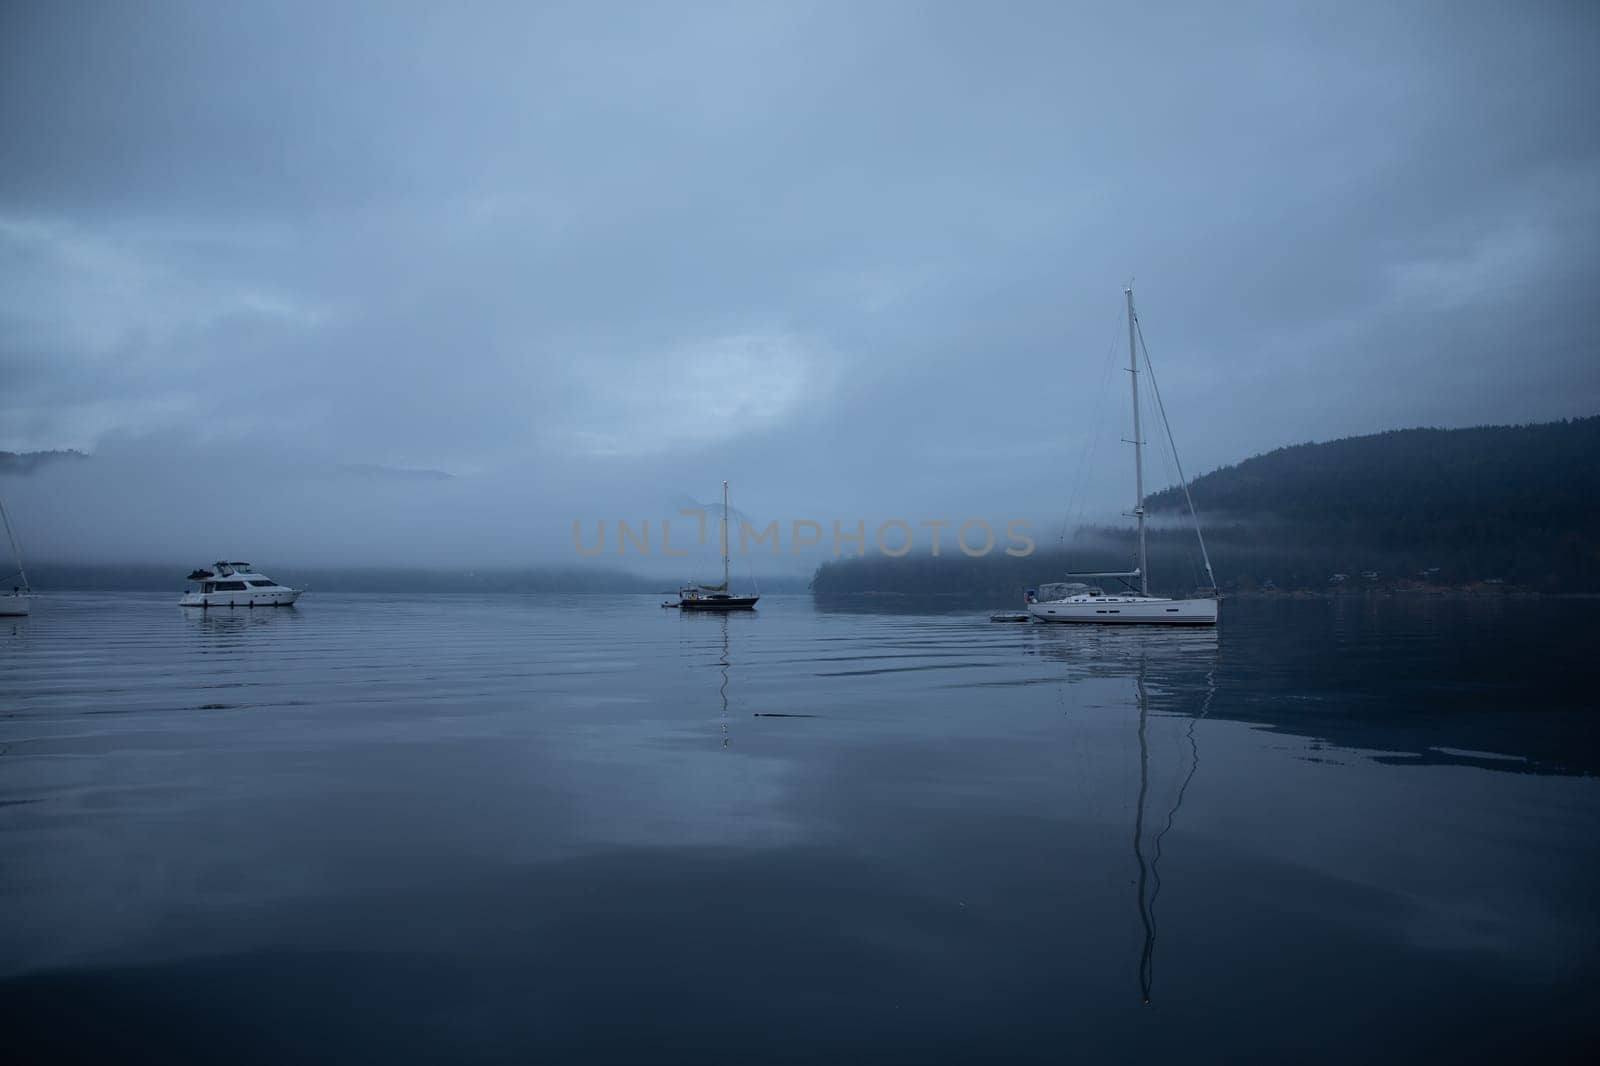 Boats anchored in a cove under dark and moody skies by Granchinho